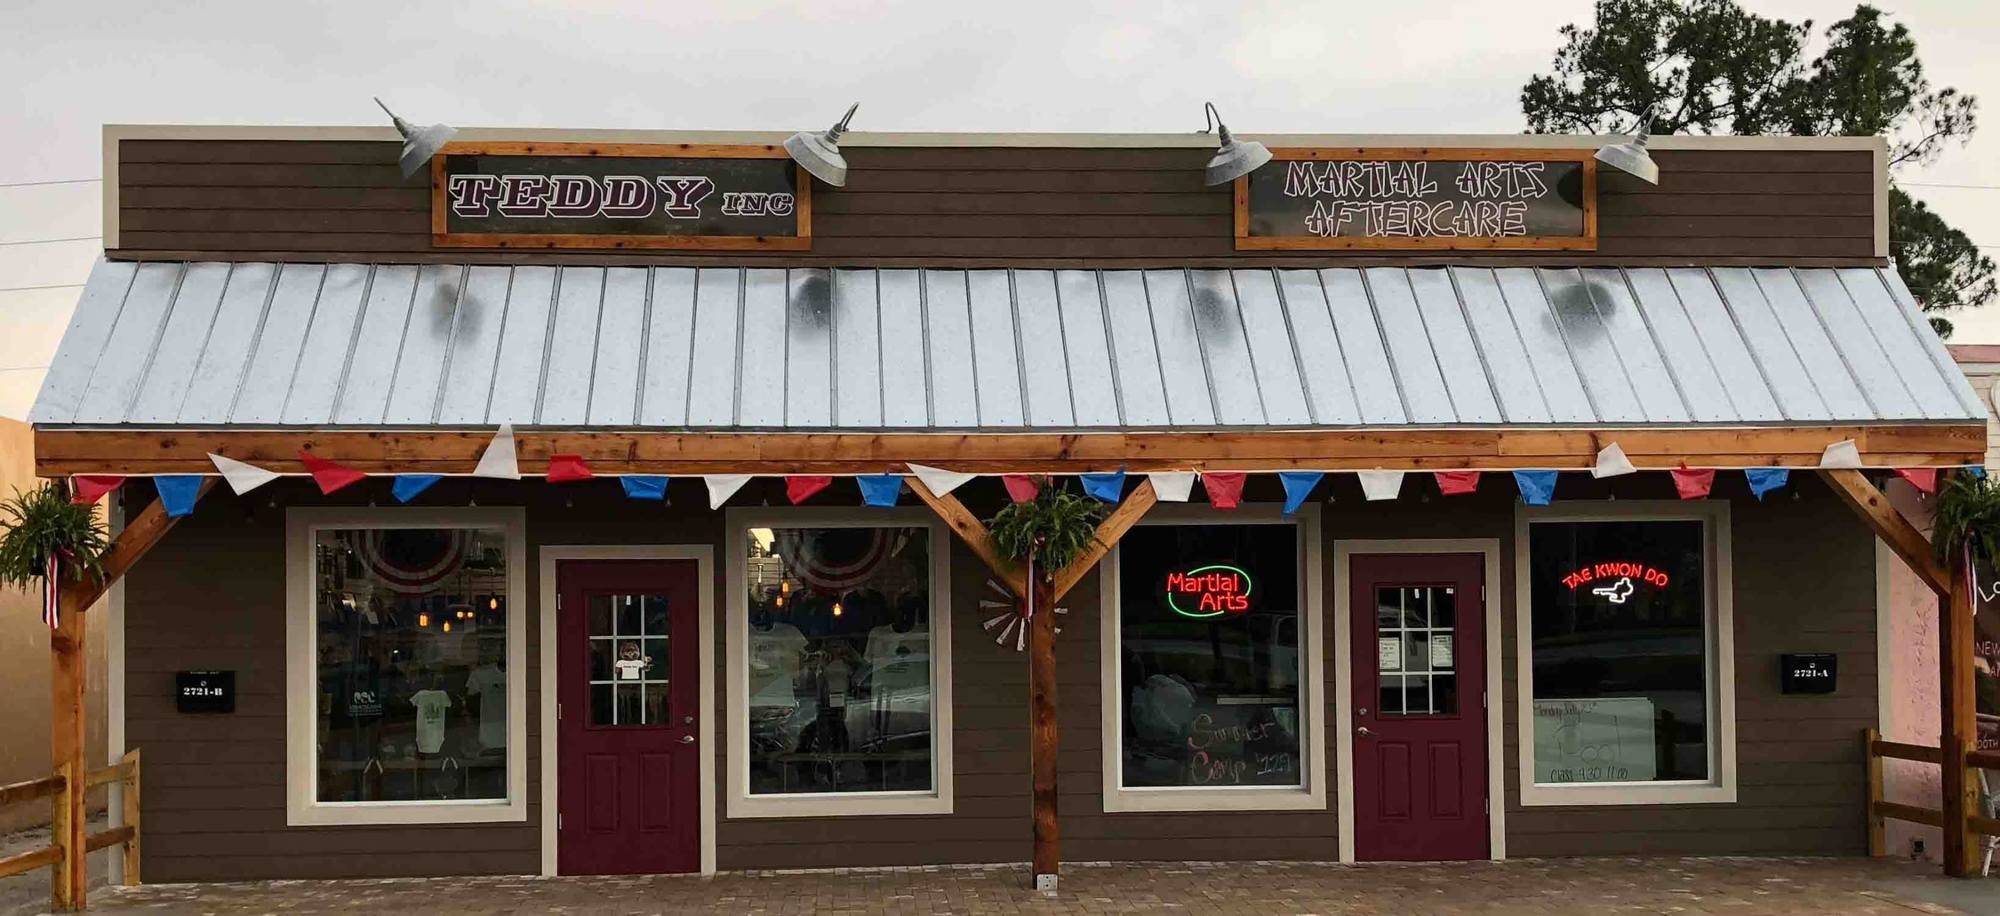 Courtesy. Brenda Anderson, a graduate of the Goodwill MicroEnterprise Institute, is the owner of Teddy Inc., a uniform and scrubs store in Port Charlotte.